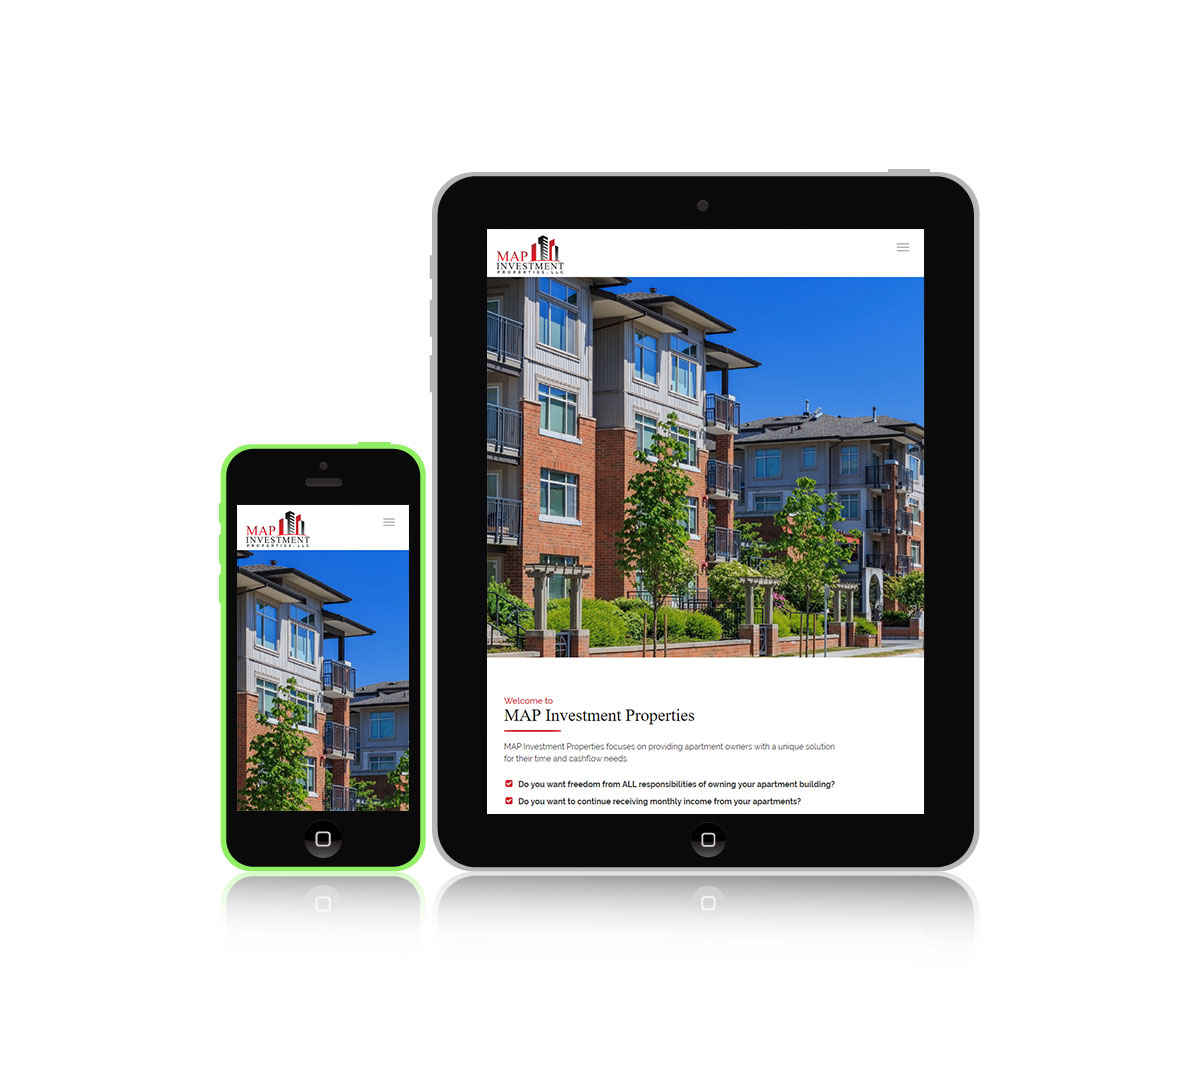 Commercial real estate mobile responsive landing page development